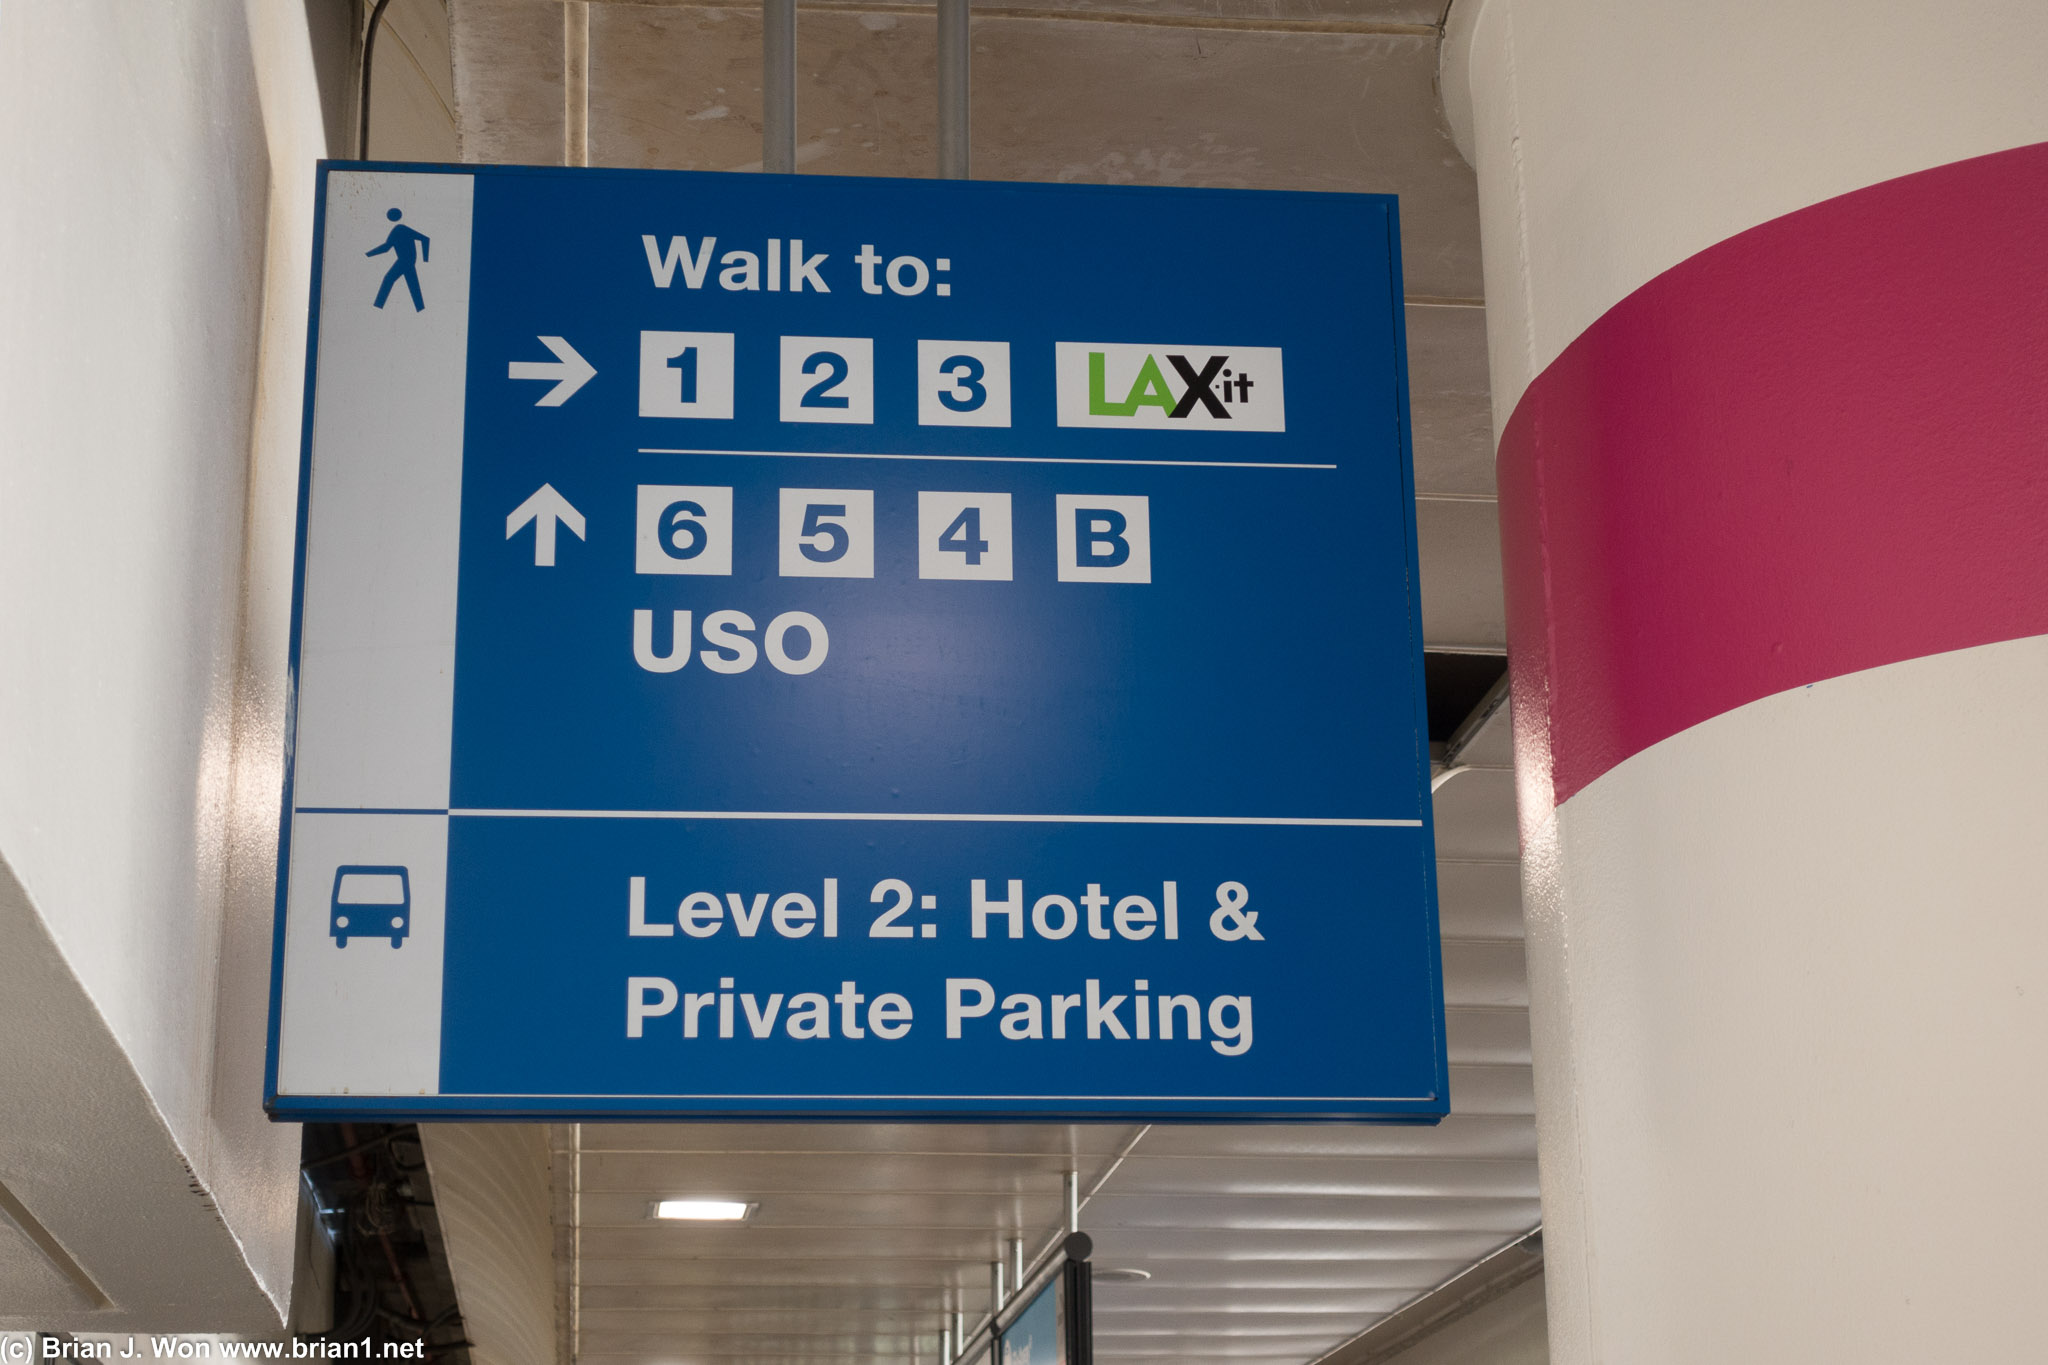 If you can't find LAX-it for your rideshare from Terminal 7, that's because you're not paying attention.